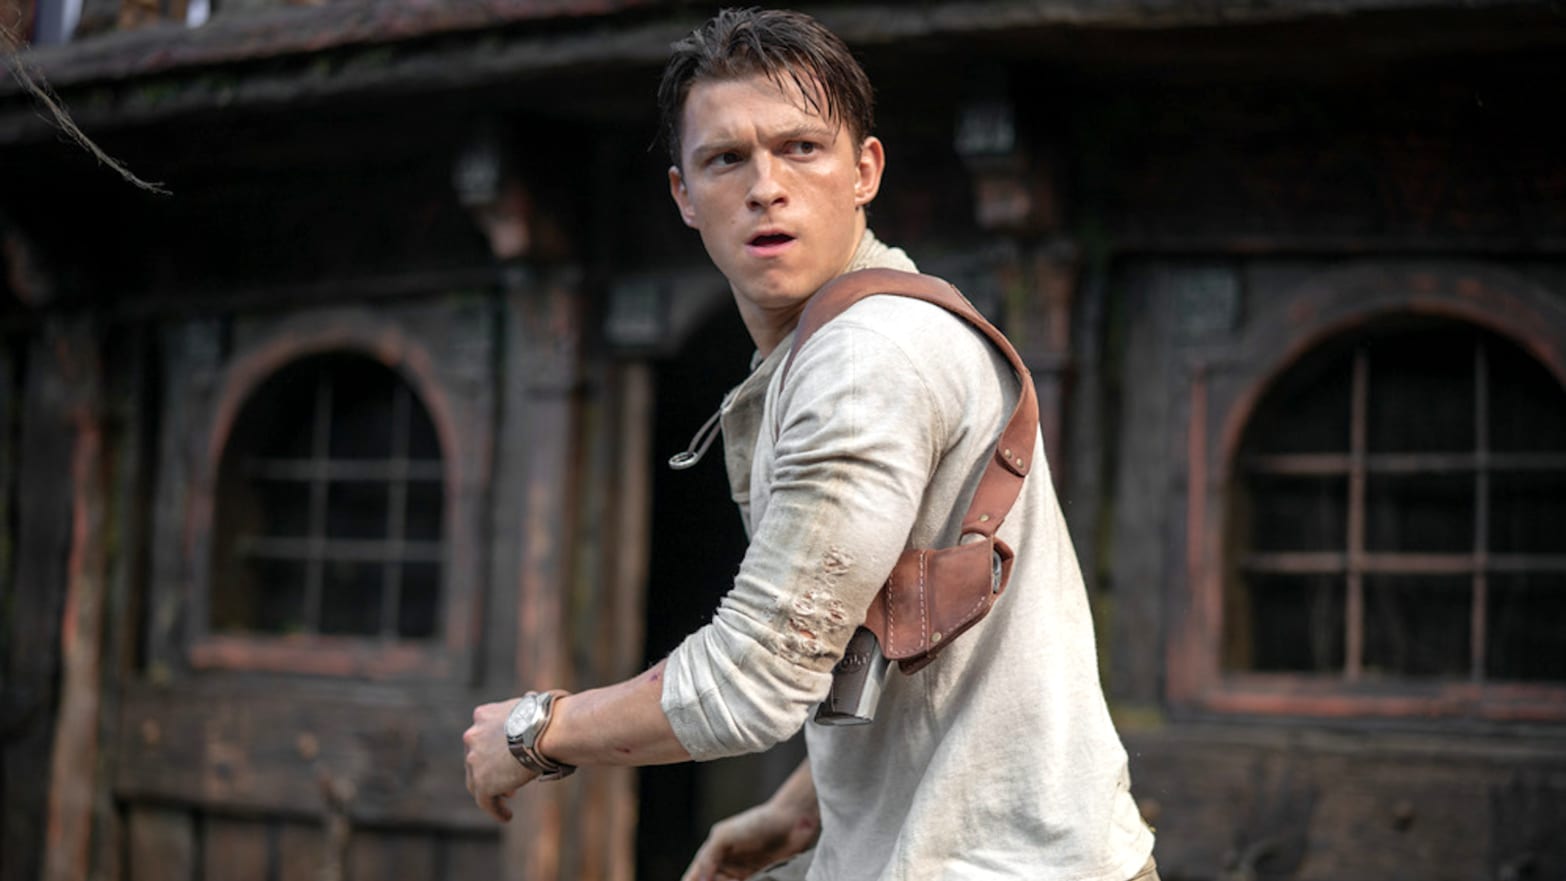 Uncharted,' Starring a Wildly Miscast Tom Holland as Nathan Drake, Is No  'Spider-Man: No Way Home